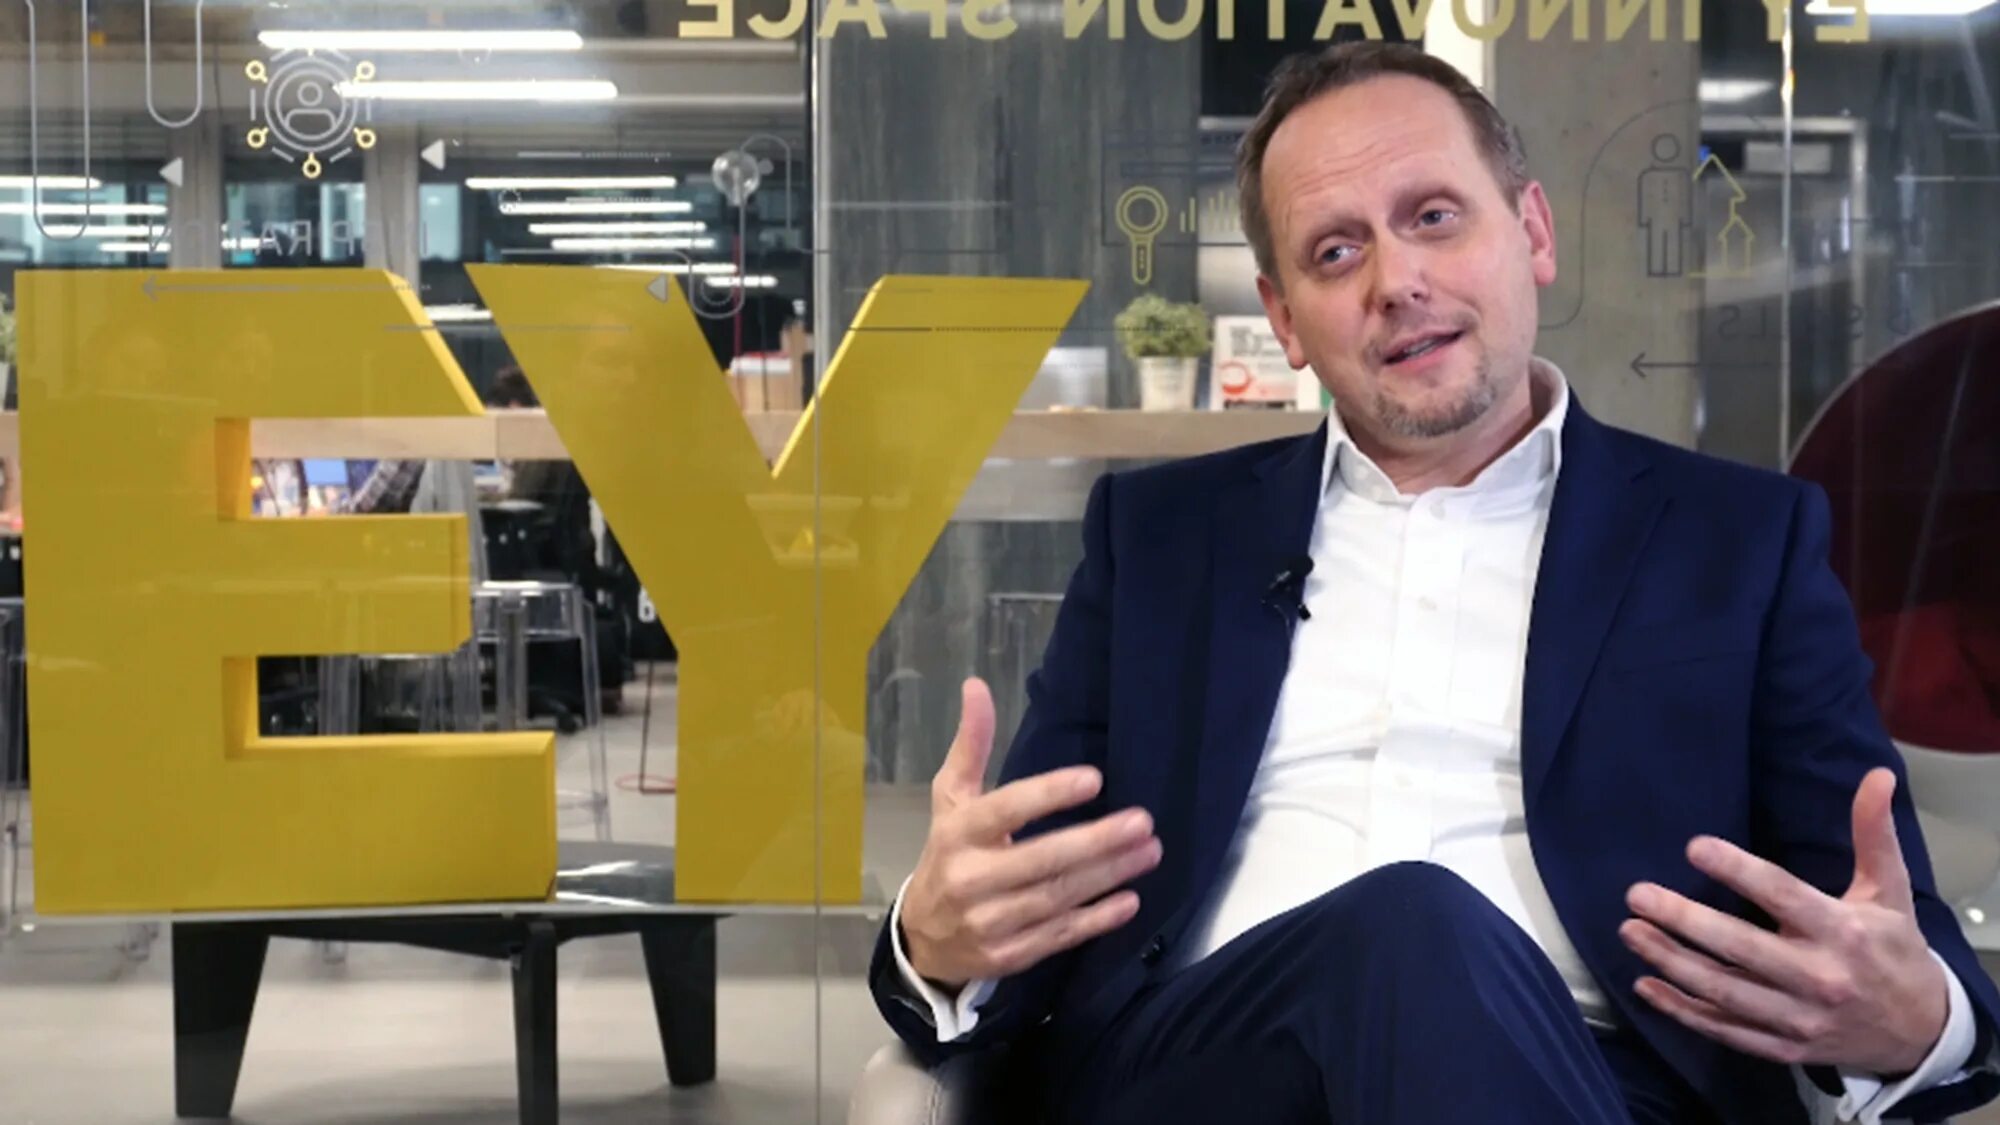 Ey компания. Ernst and young. Ernst and young лого.